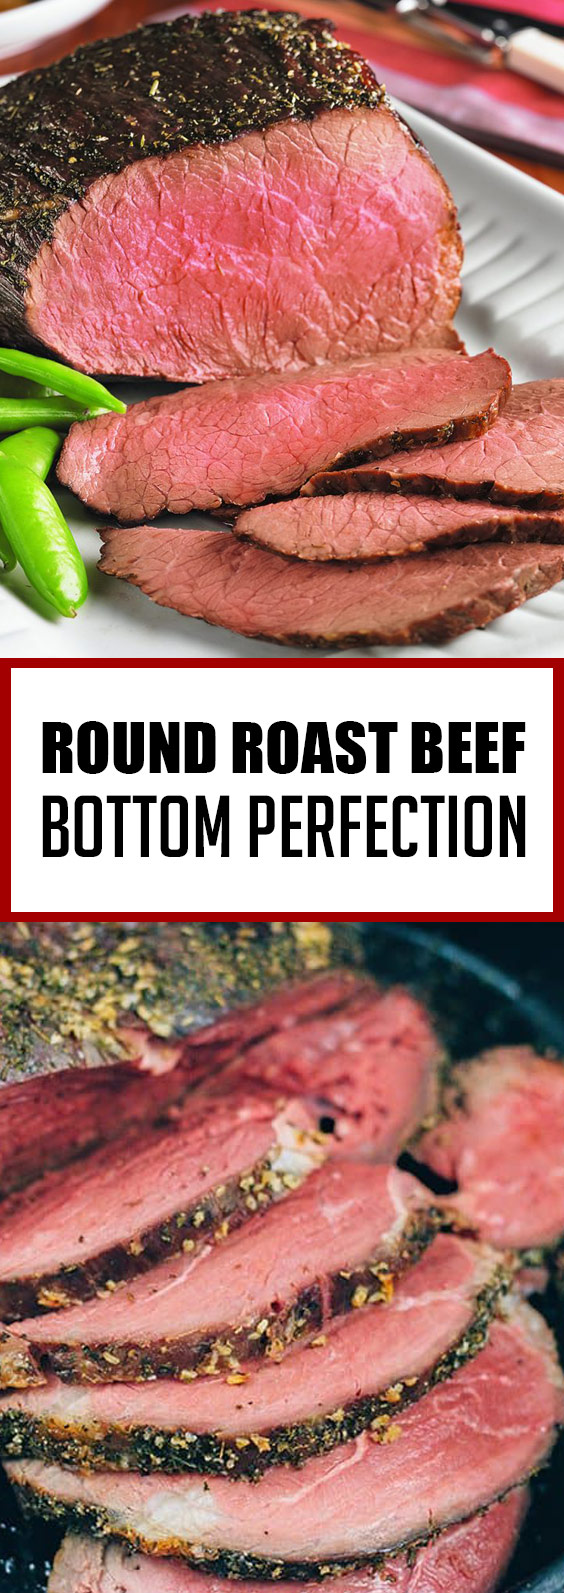 Round Roast Beef Bottom Perfection #roundroastbeef #beef - easy booking